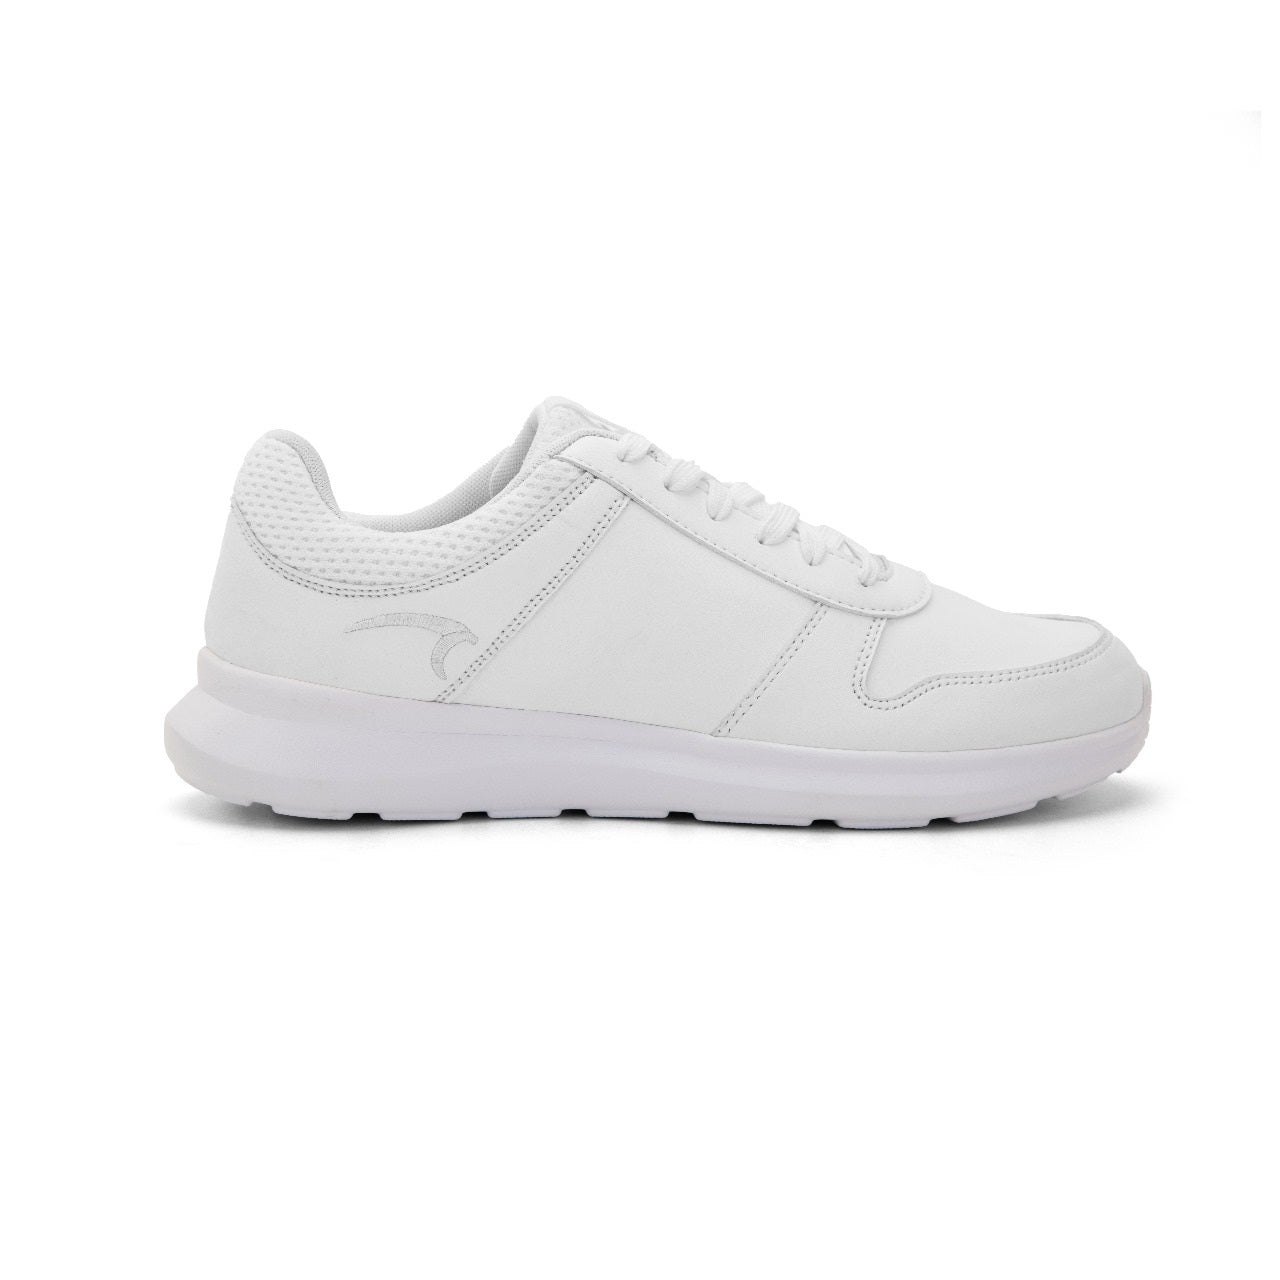 Mintra Alpha Lifestyle Shoes For Women, White